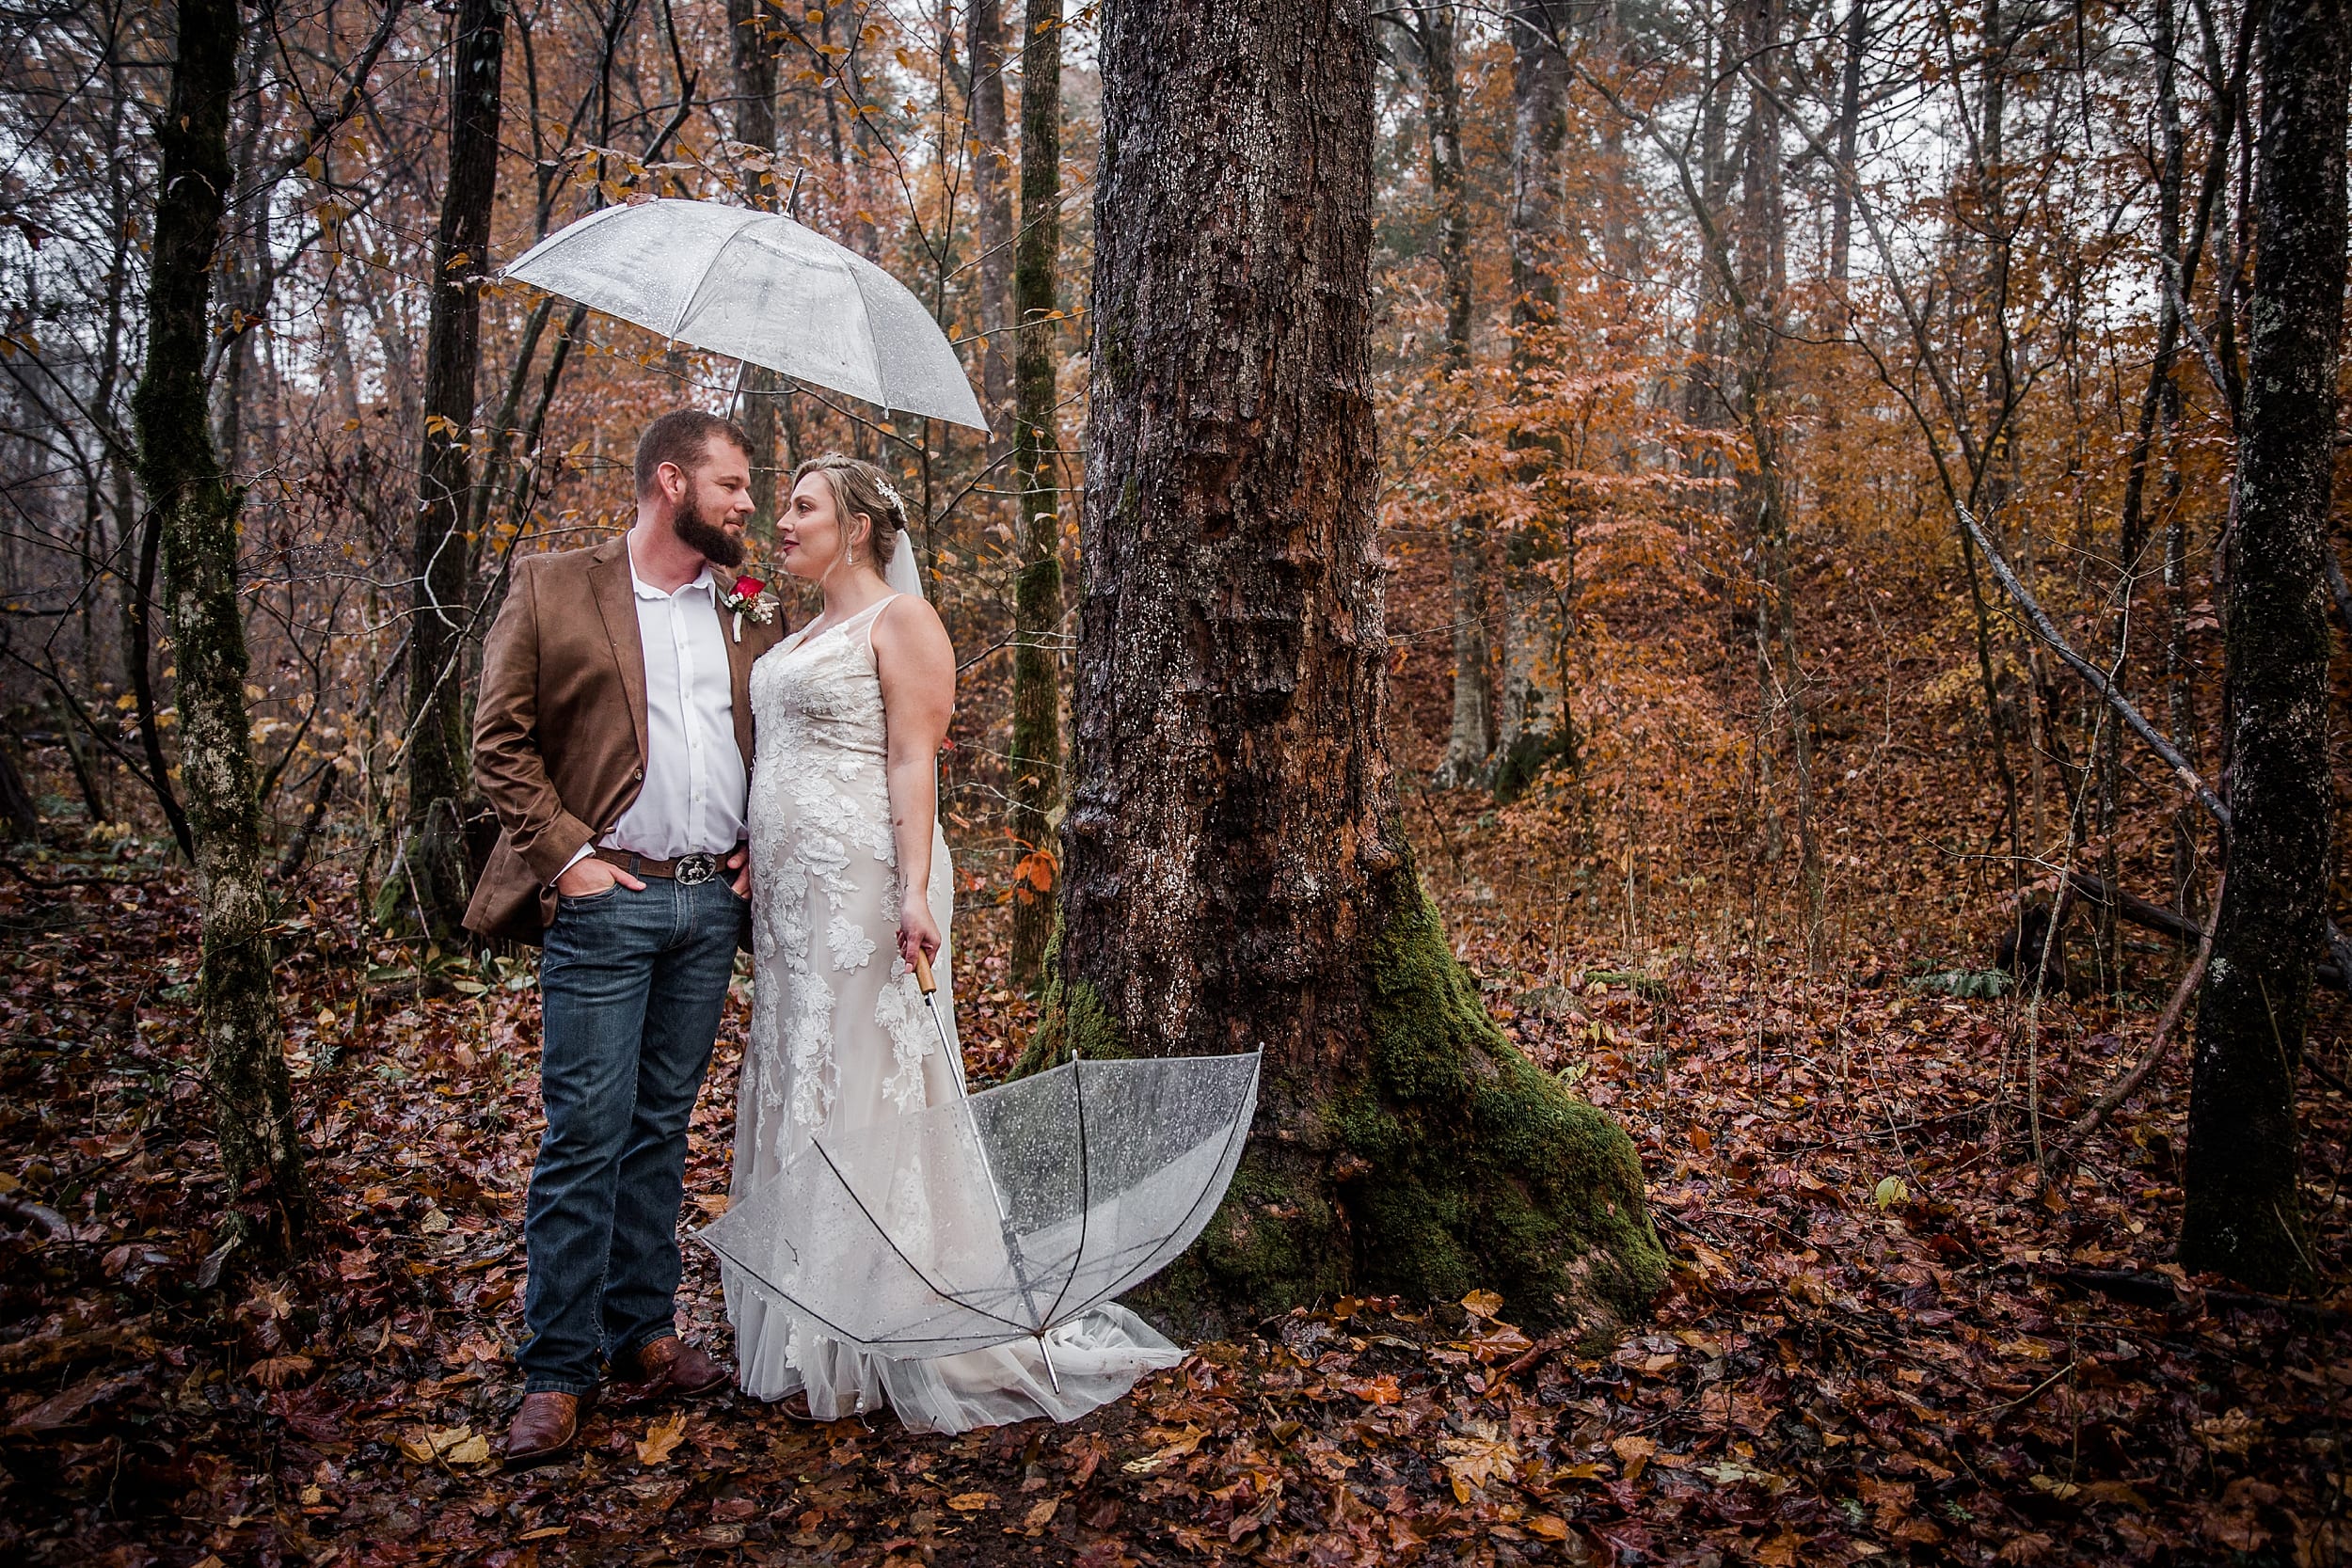 Rainy Day Wedding at Chapel in the Hollow Smoky Mountain Elopement